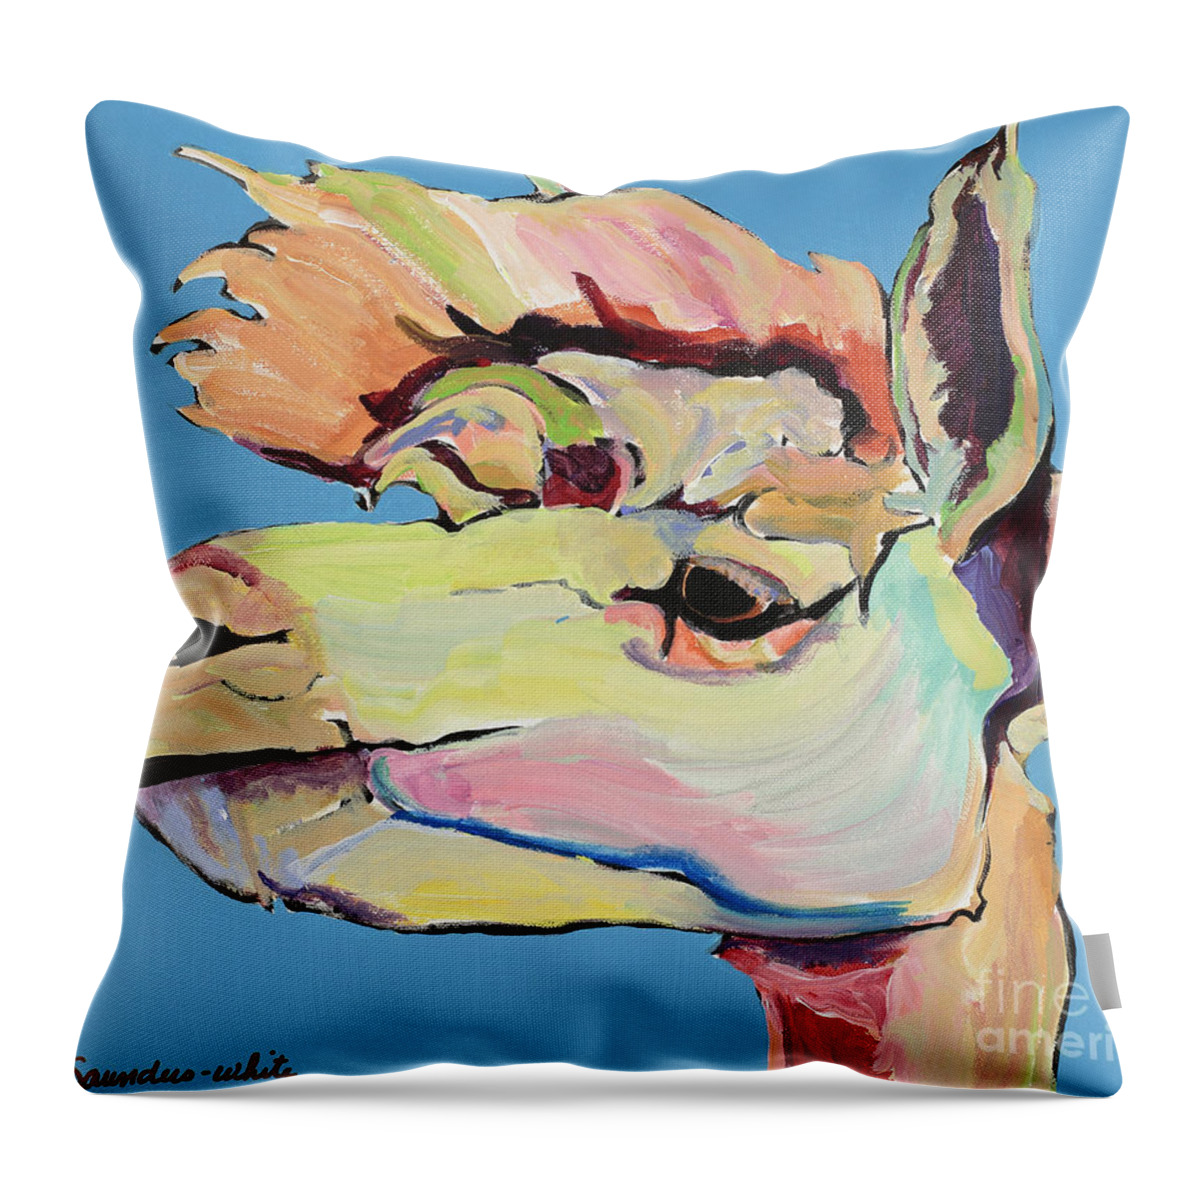 Pat Saunders-white Throw Pillow featuring the painting The Sentinel by Pat Saunders-White